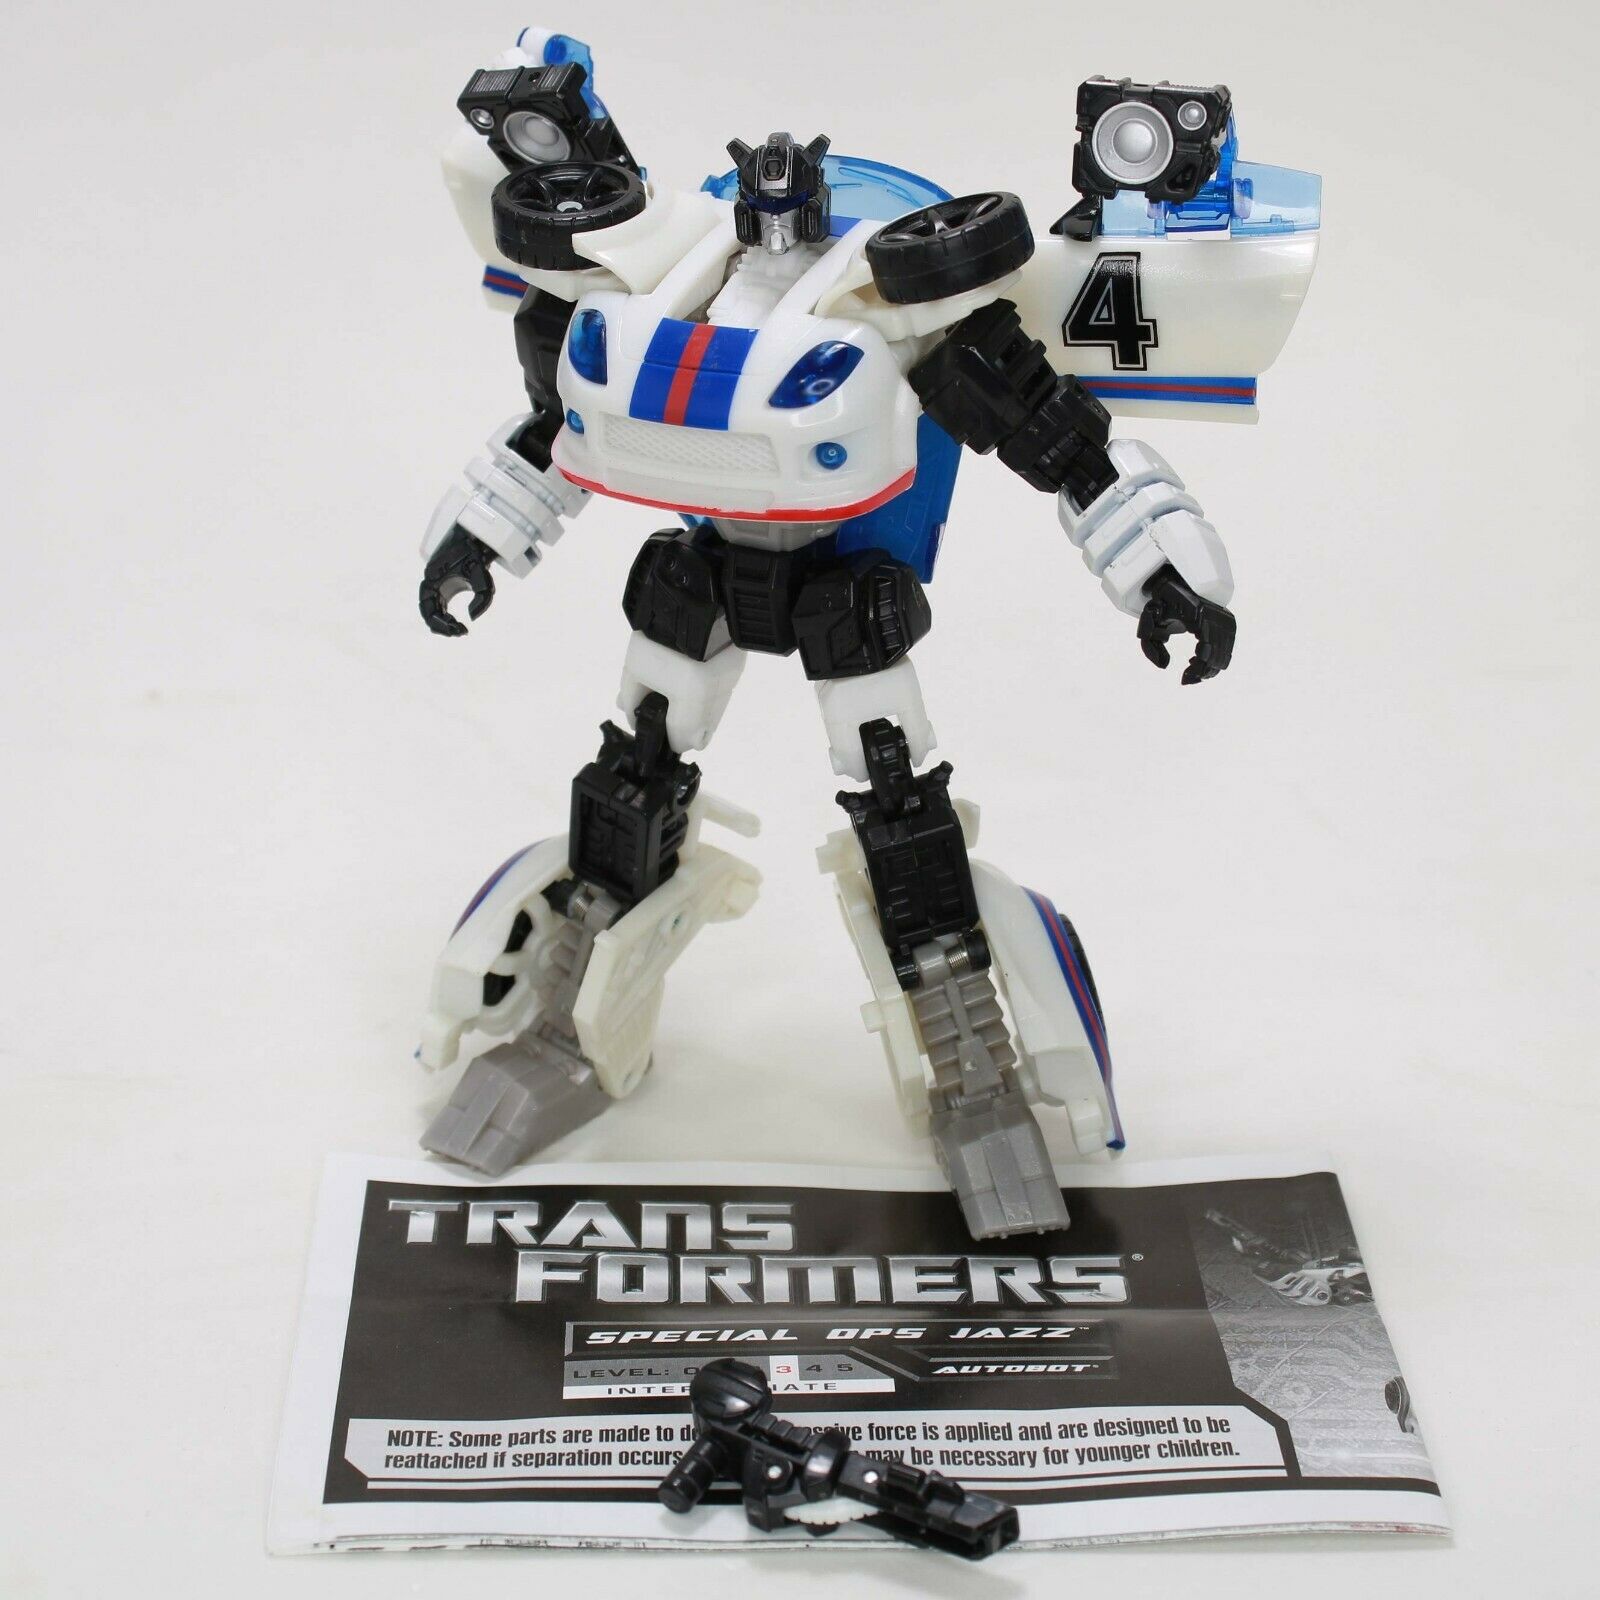 Transformers Special Ops Jazz - Reveal The Shield RTS Deluxe Class 100%Complete